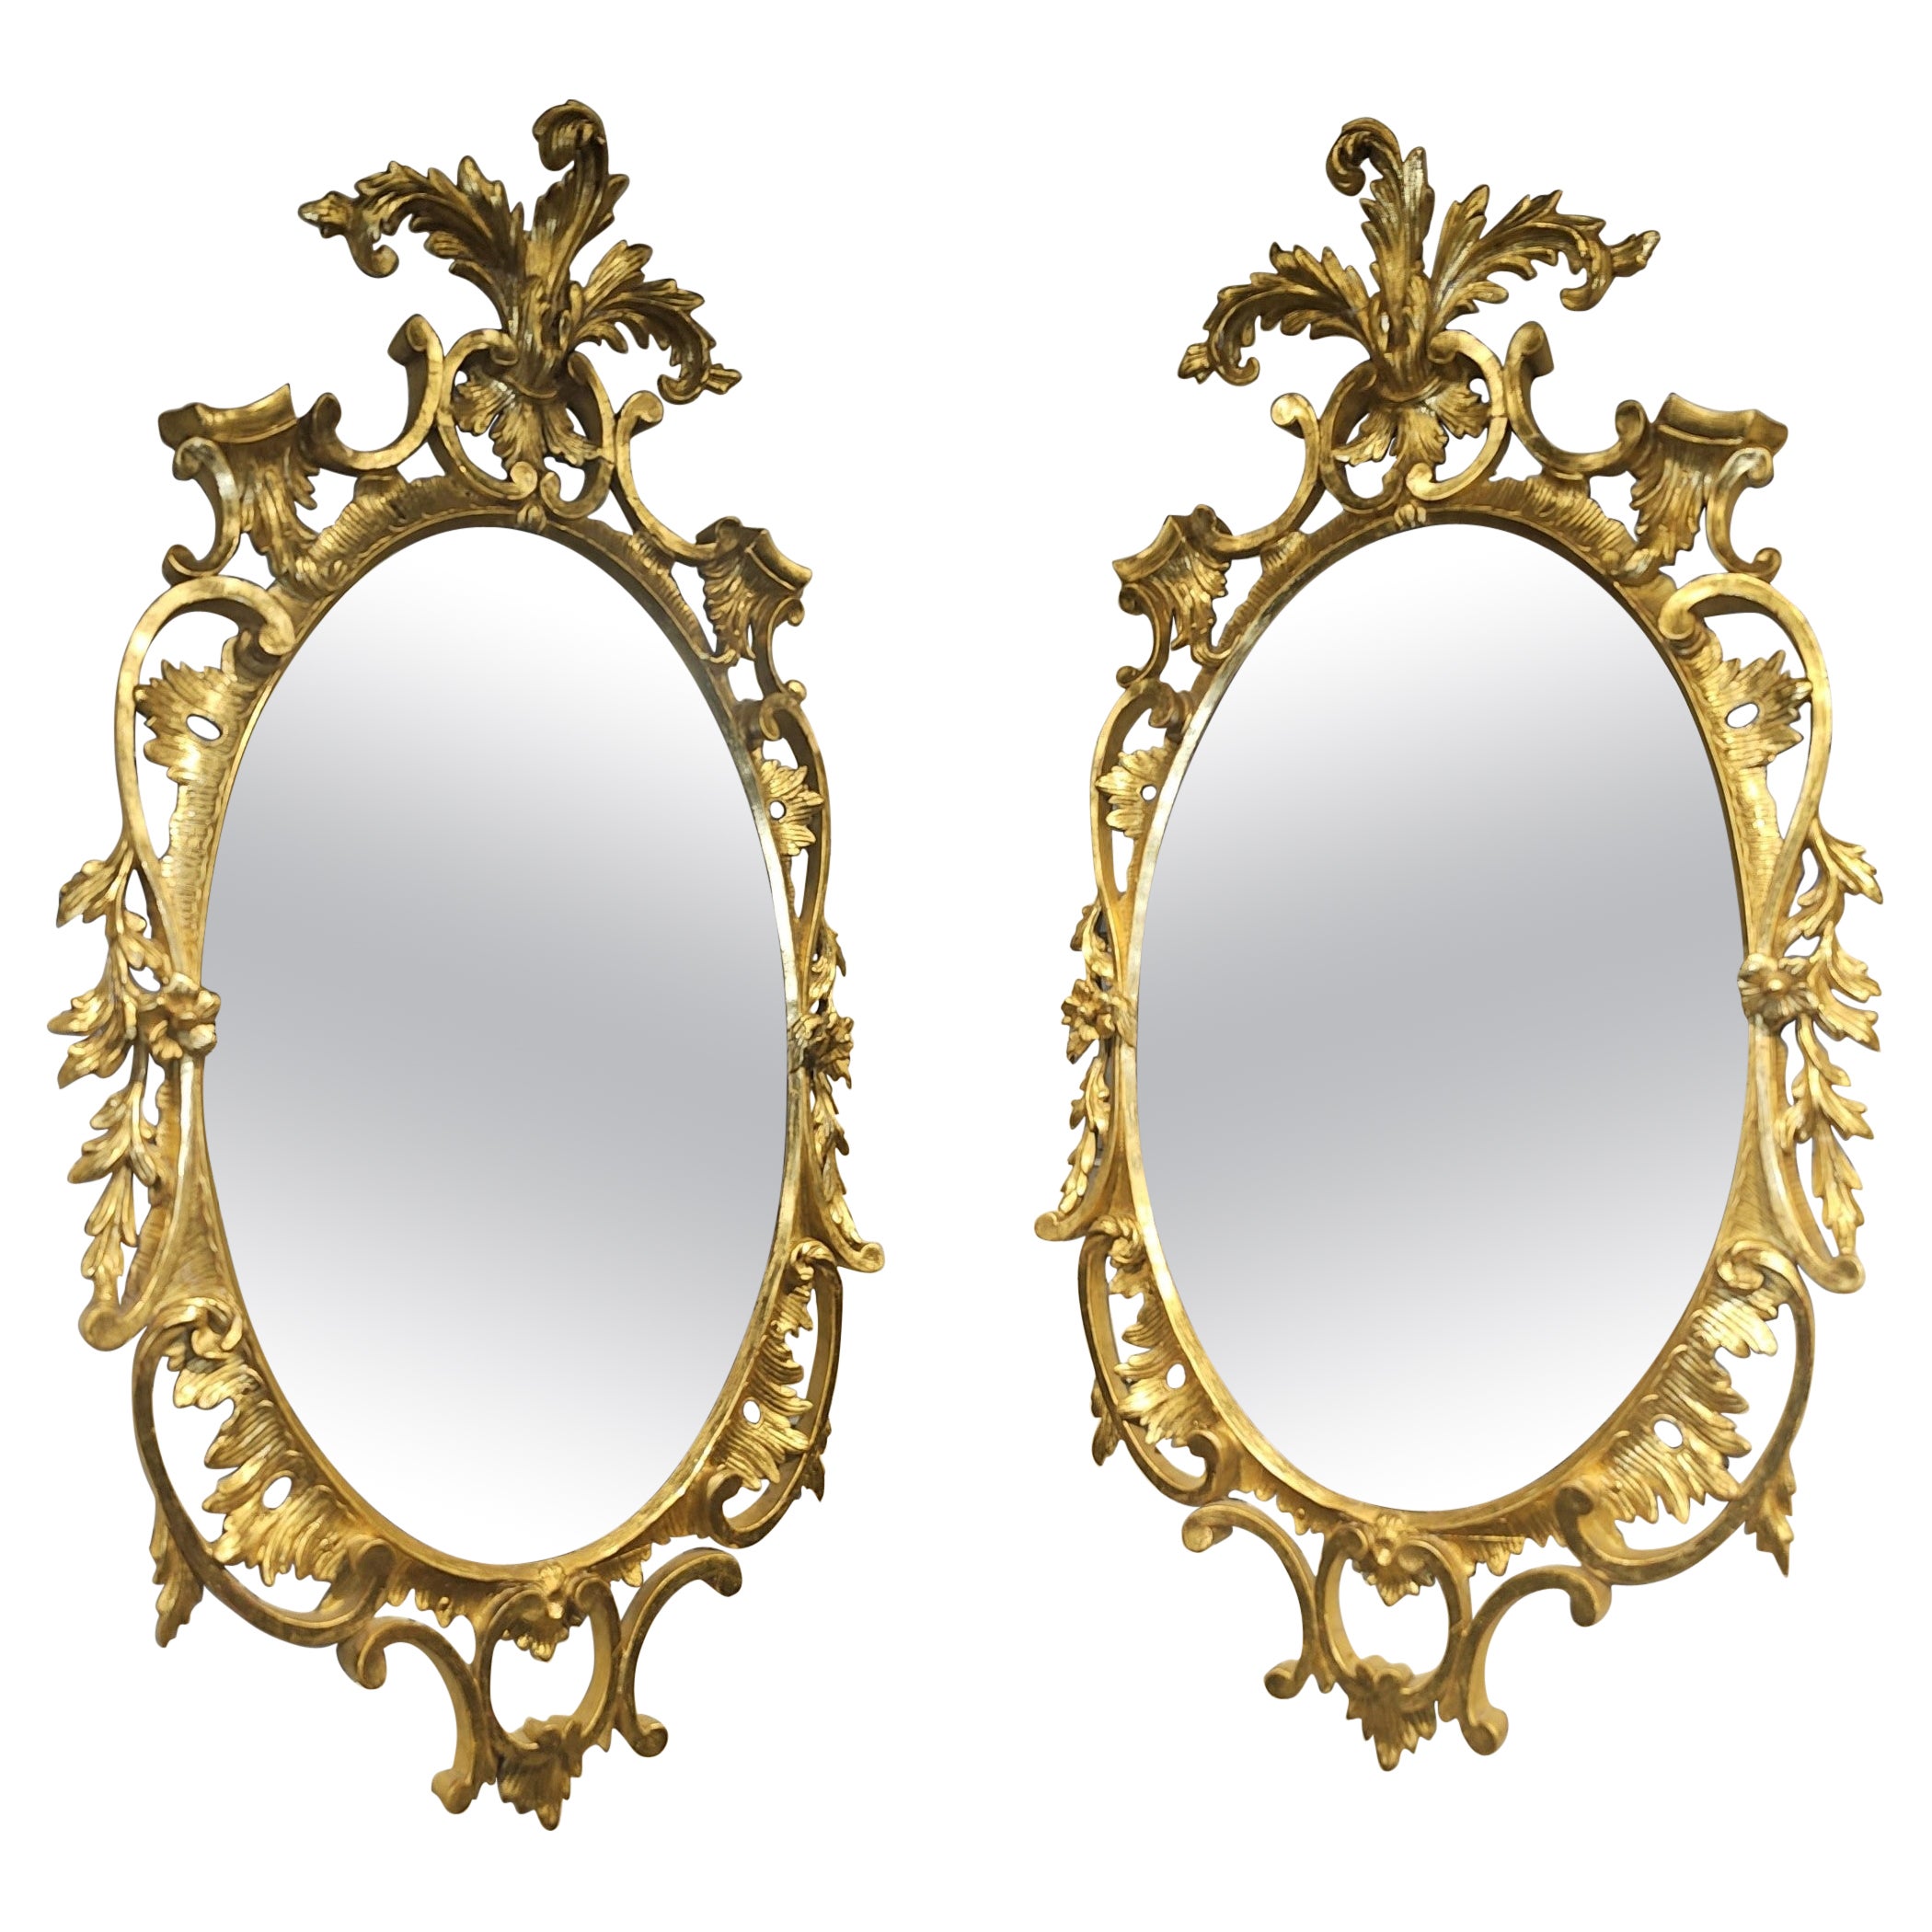 A pair of early 20th century Louis XV Style Gilt Frame Oval Mirror. Measure 20